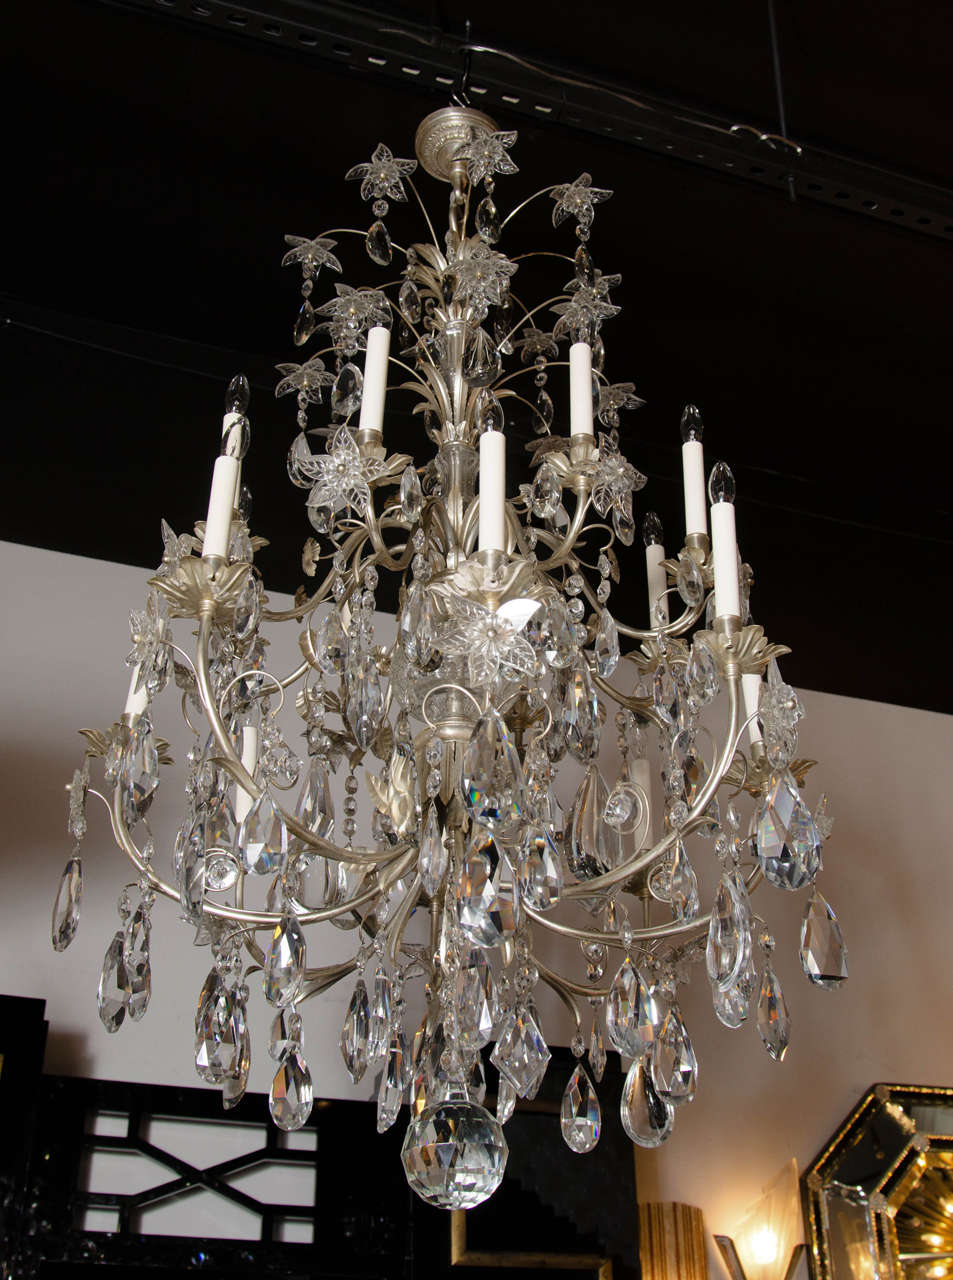 This glamorous Hollywood Regency style chandelier features an abundance of fine cut crystal pendants- resembling cut and beveled diamonds- hanging from silvered bronze fittings. This exquisite chandelier features a stylized canopy with beaded